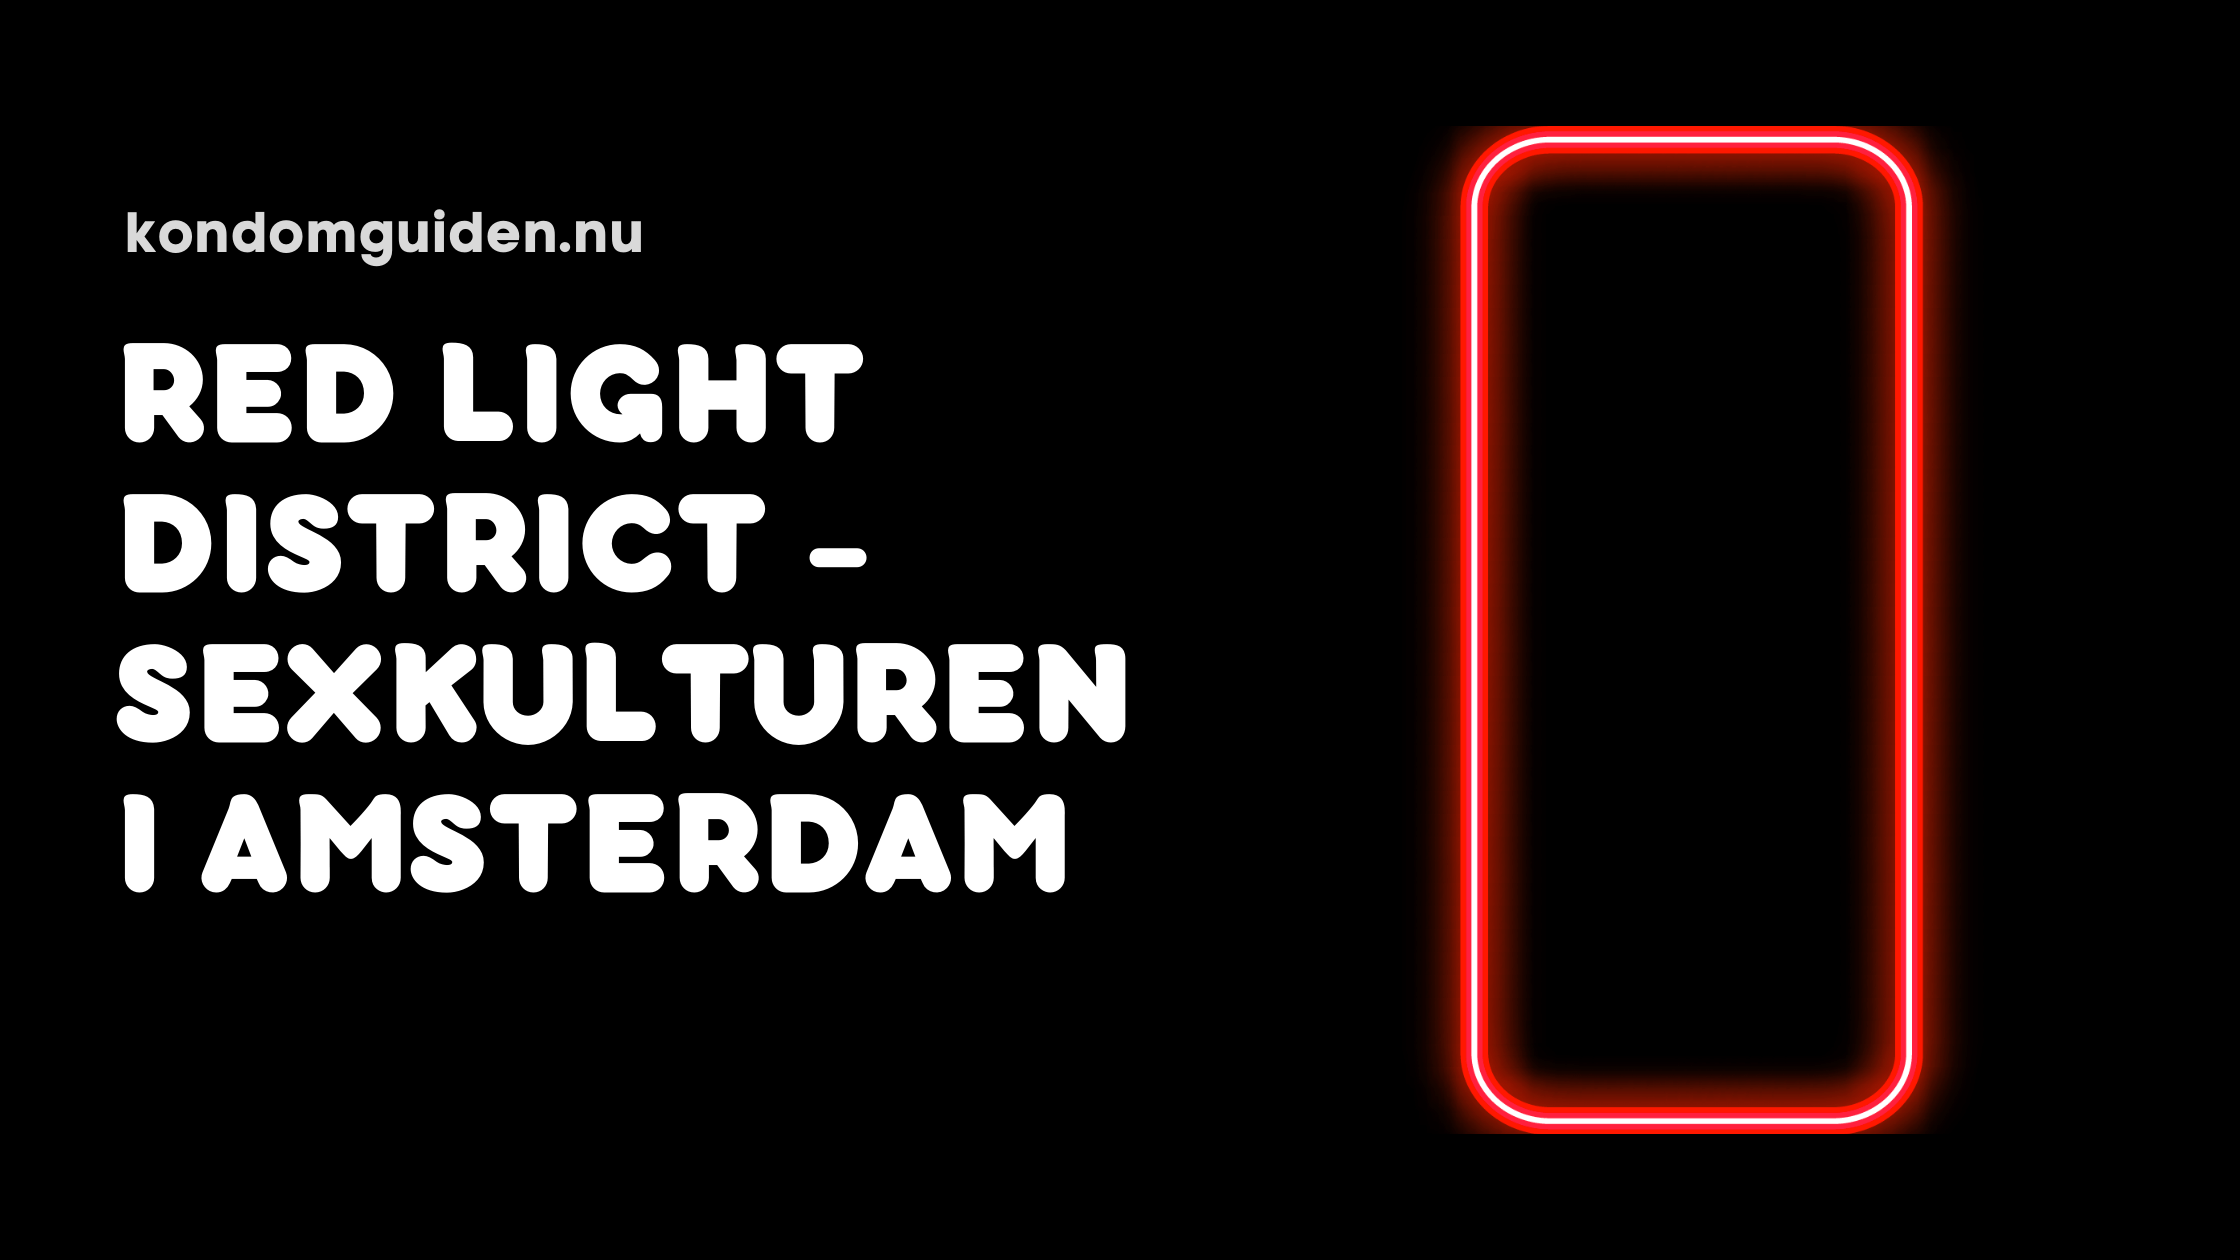 You are currently viewing Sexkulturen i Amsterdam – Red Light District